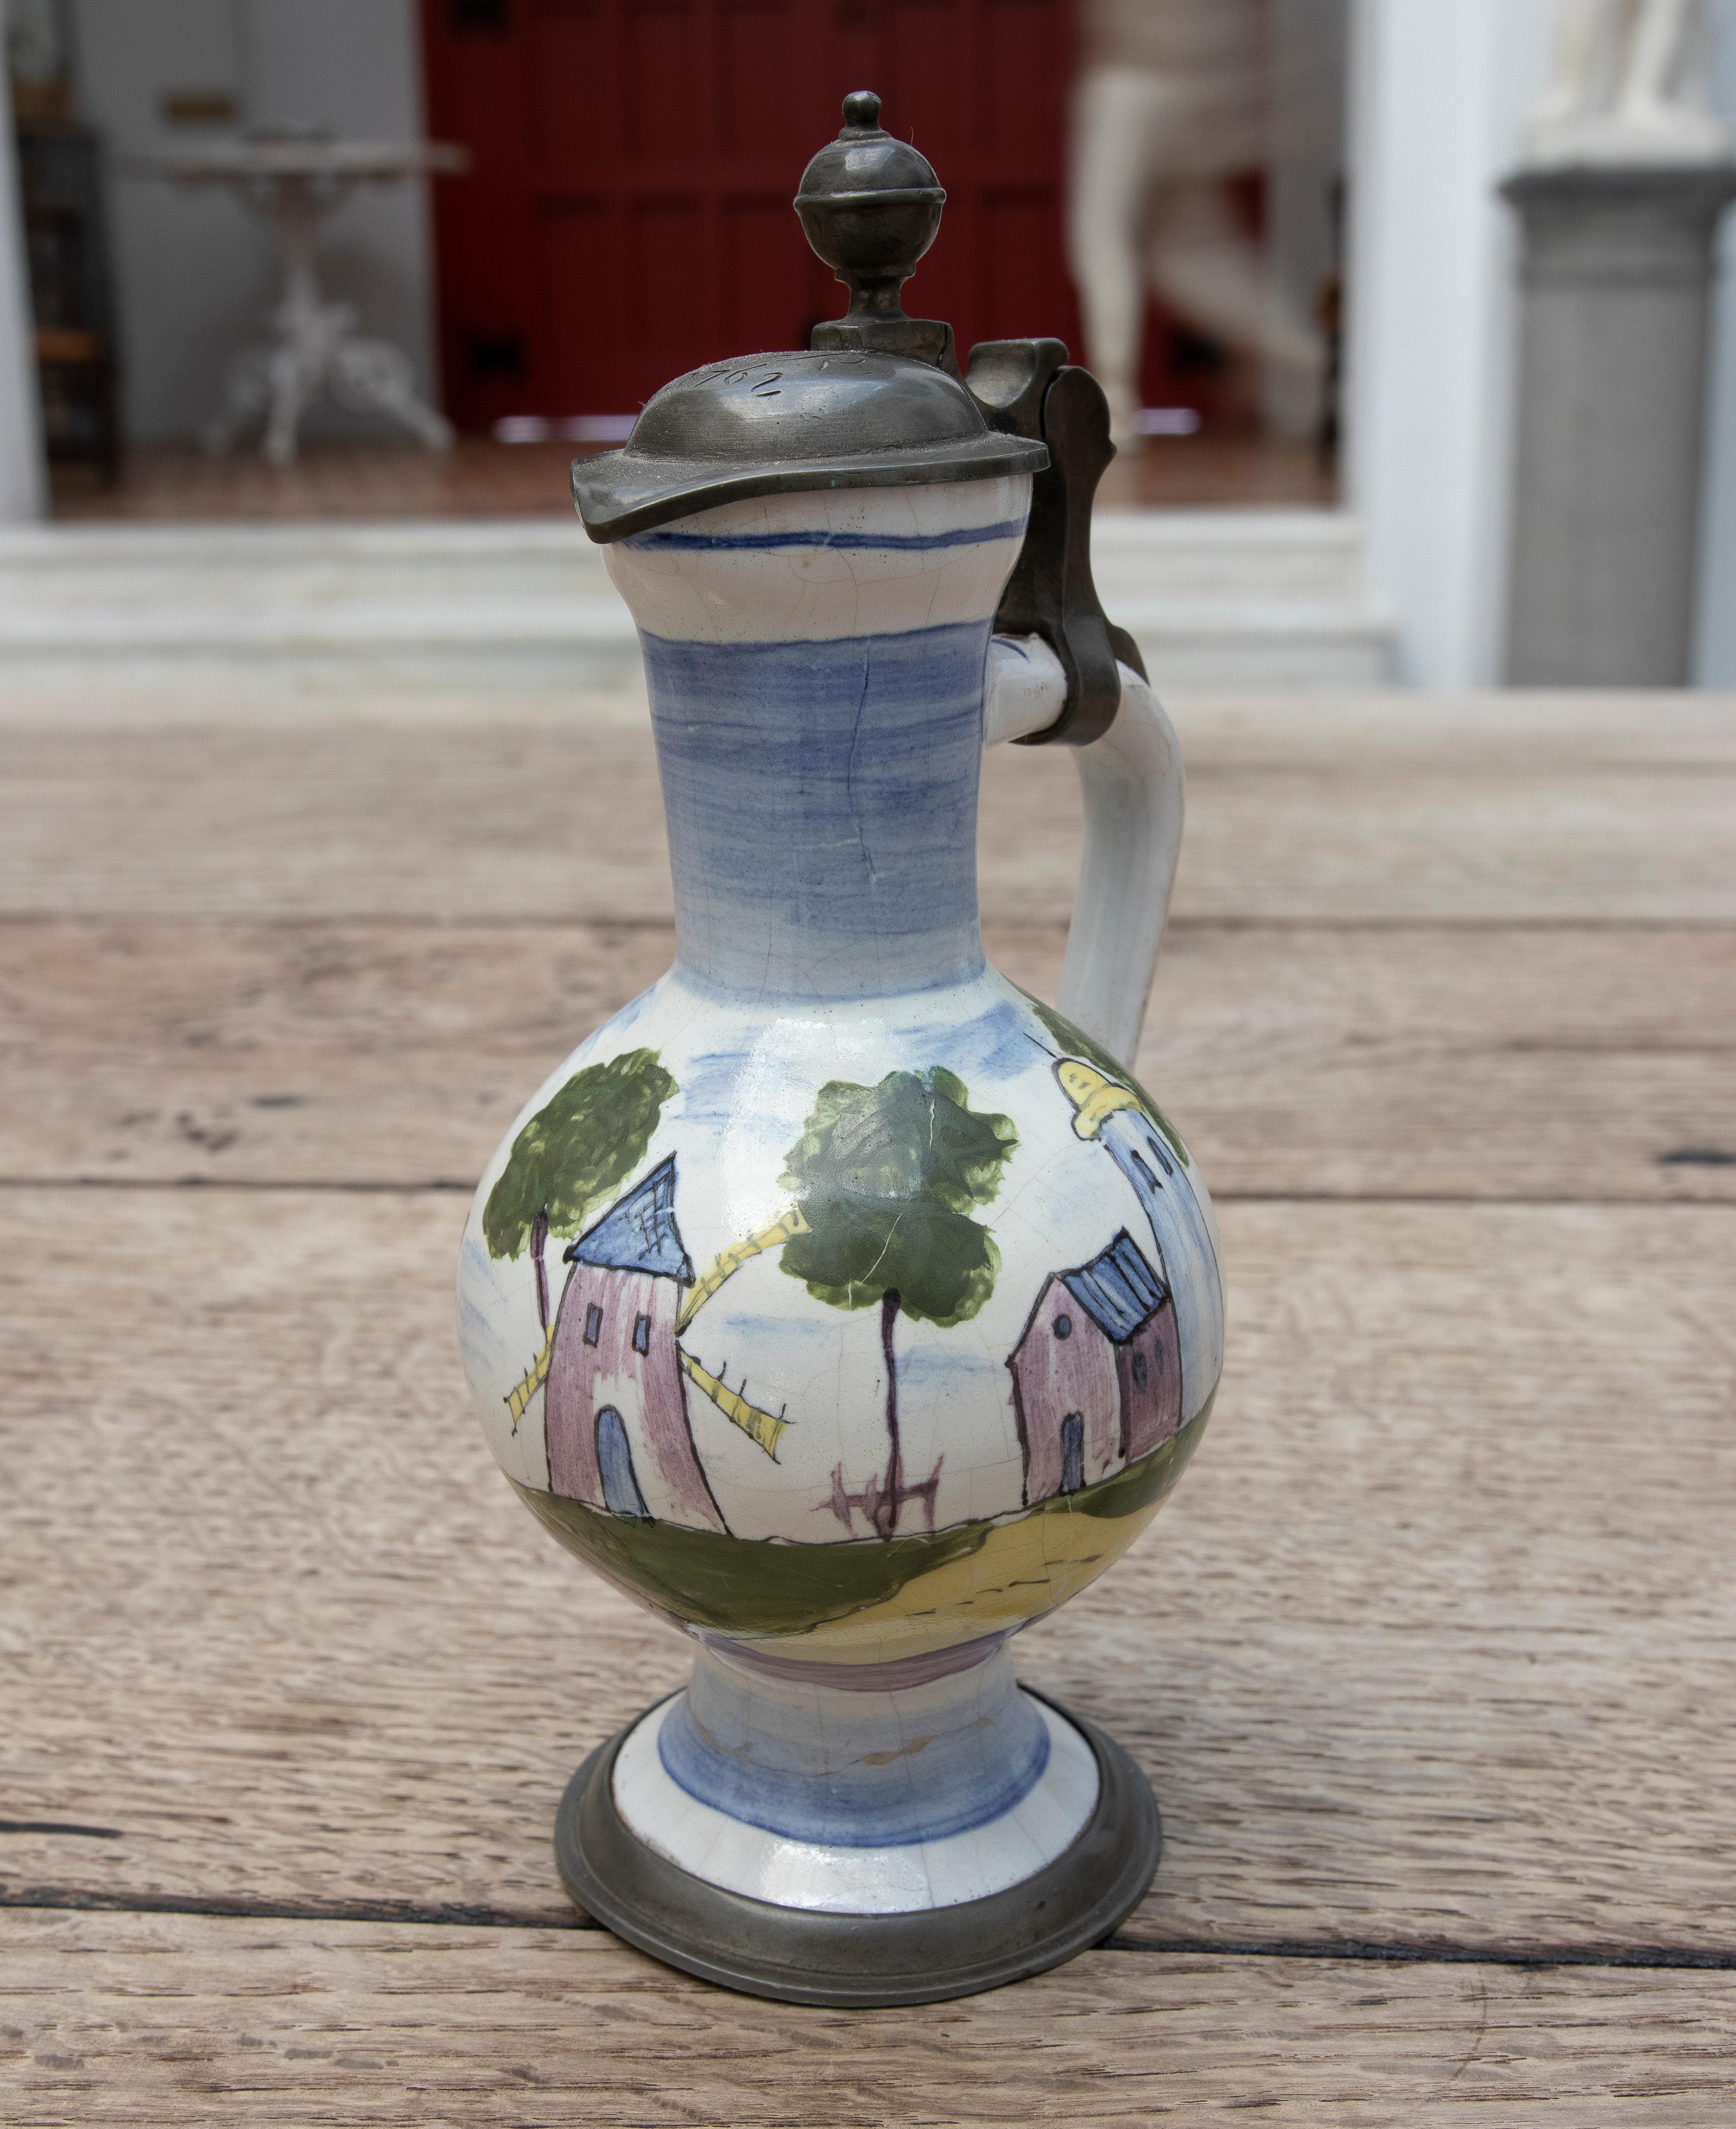 Dutch Hand-Painted Ceramic Jug with Lead Lid, Dated From 1762, For Sale